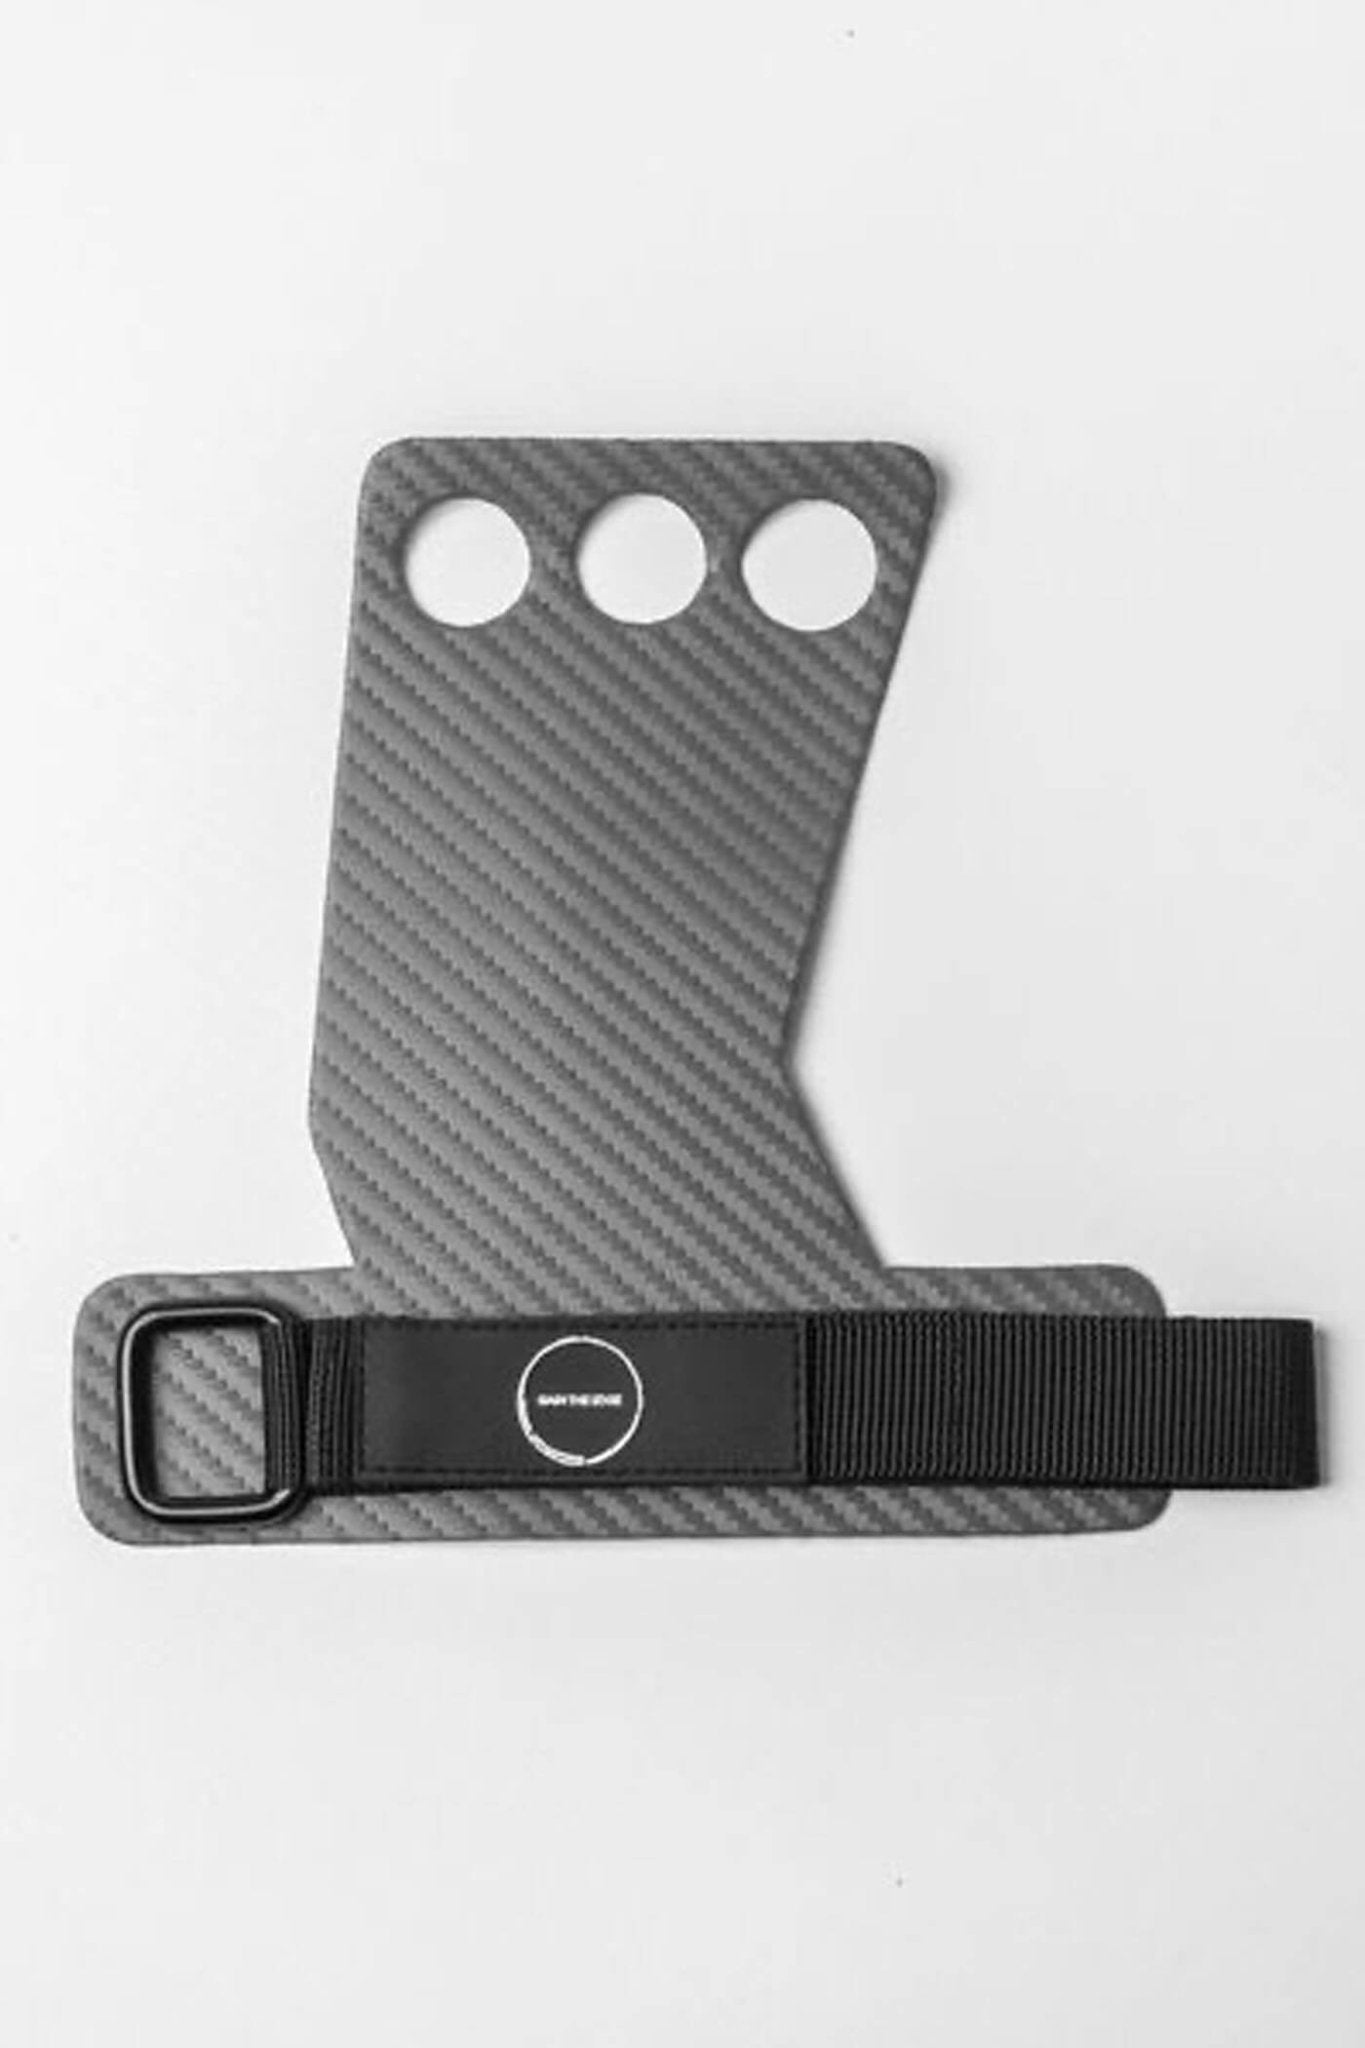 Hand Grips for Gym & Crossfit - Gain The Edge US